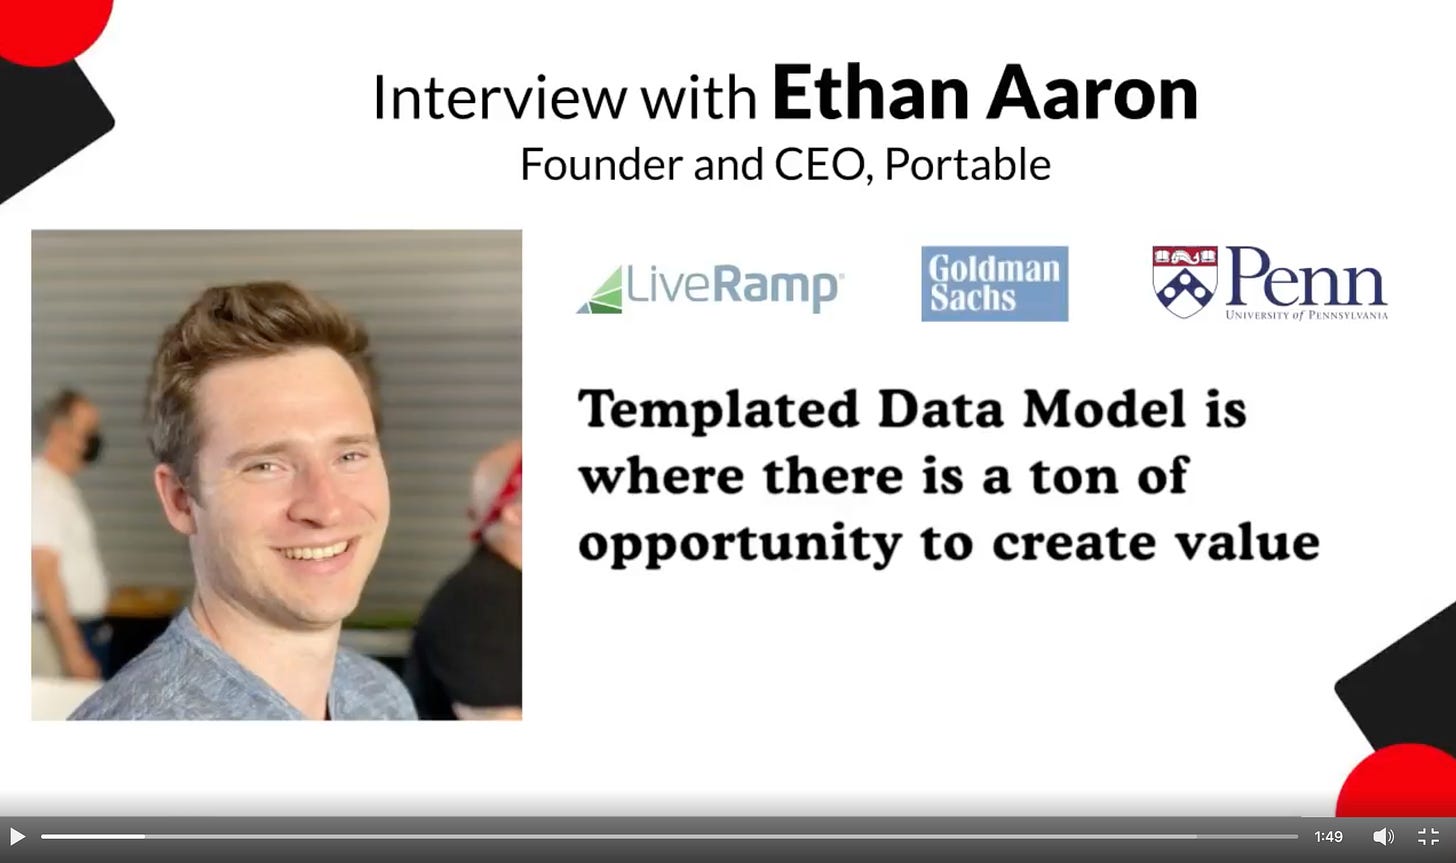 Full LinkedIn Post: Templated Data Model is where there is a ton of opportunity to create value